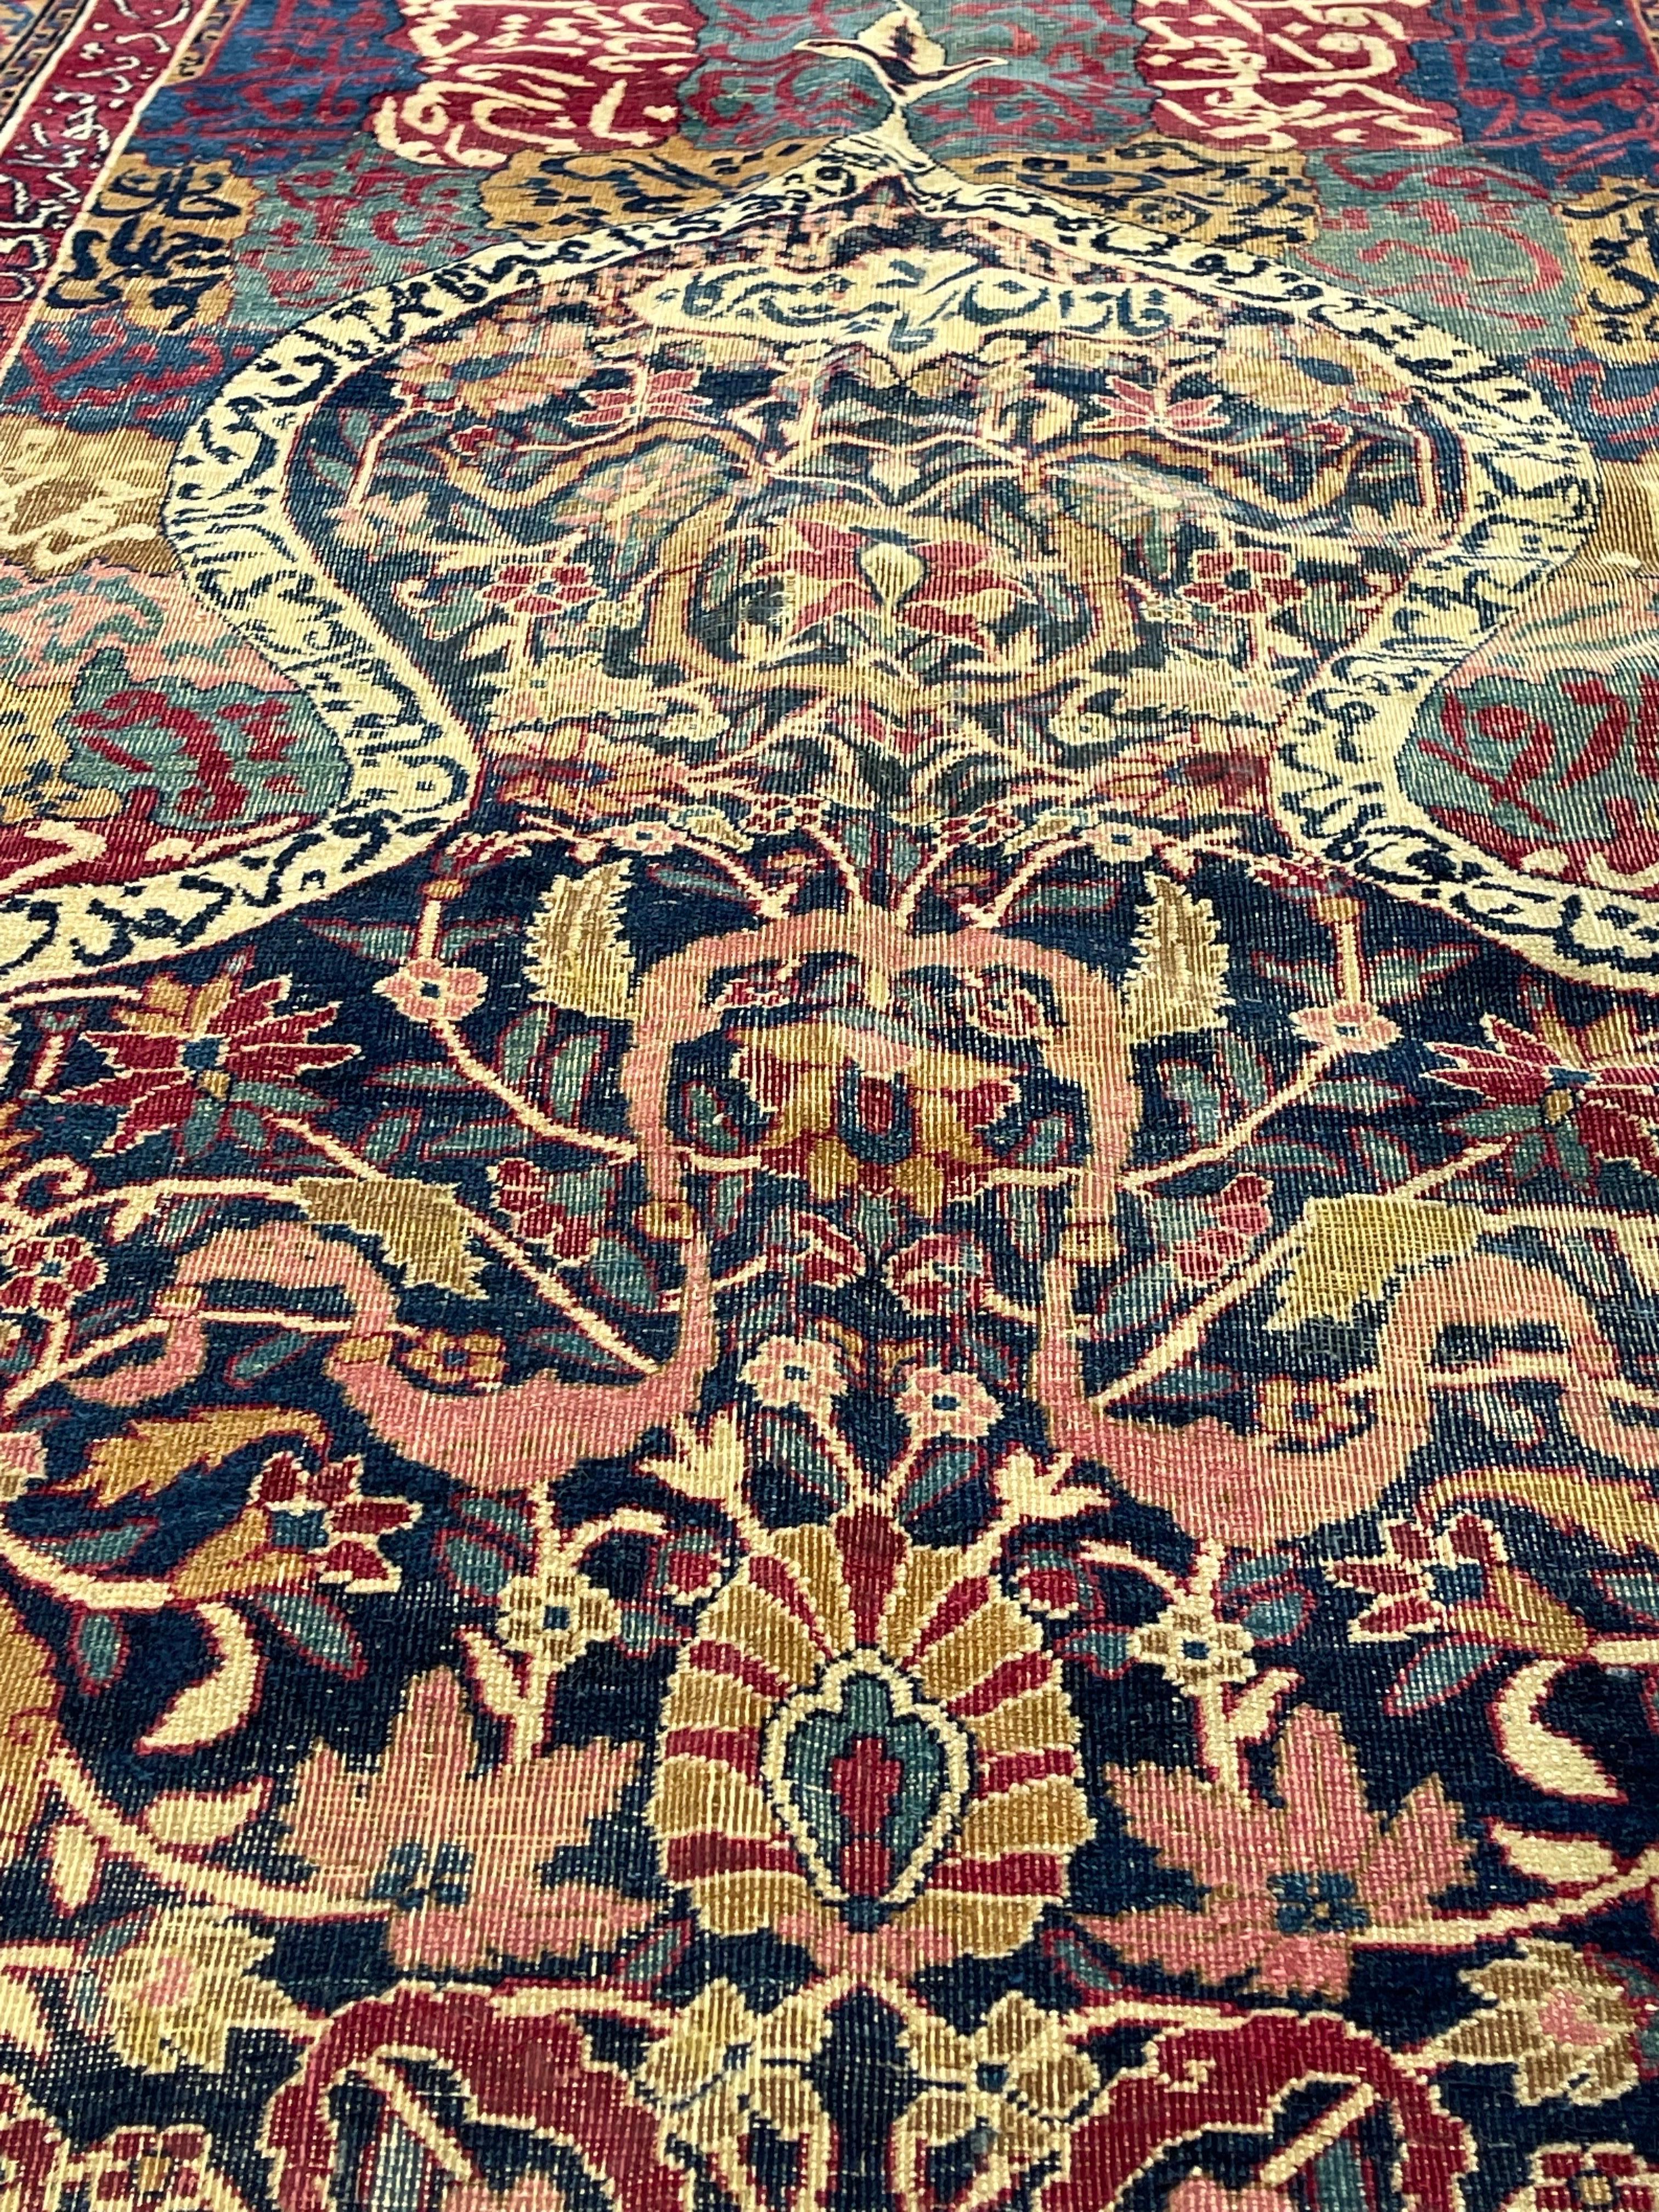 The Turkish origin of this carpet remains undisputed. This magnificent example sprung from the most pure Islamic mysticism from the apex of the Mihrab in the shape of the mosque arch hangs the traditional ewer filled with carnations and the design